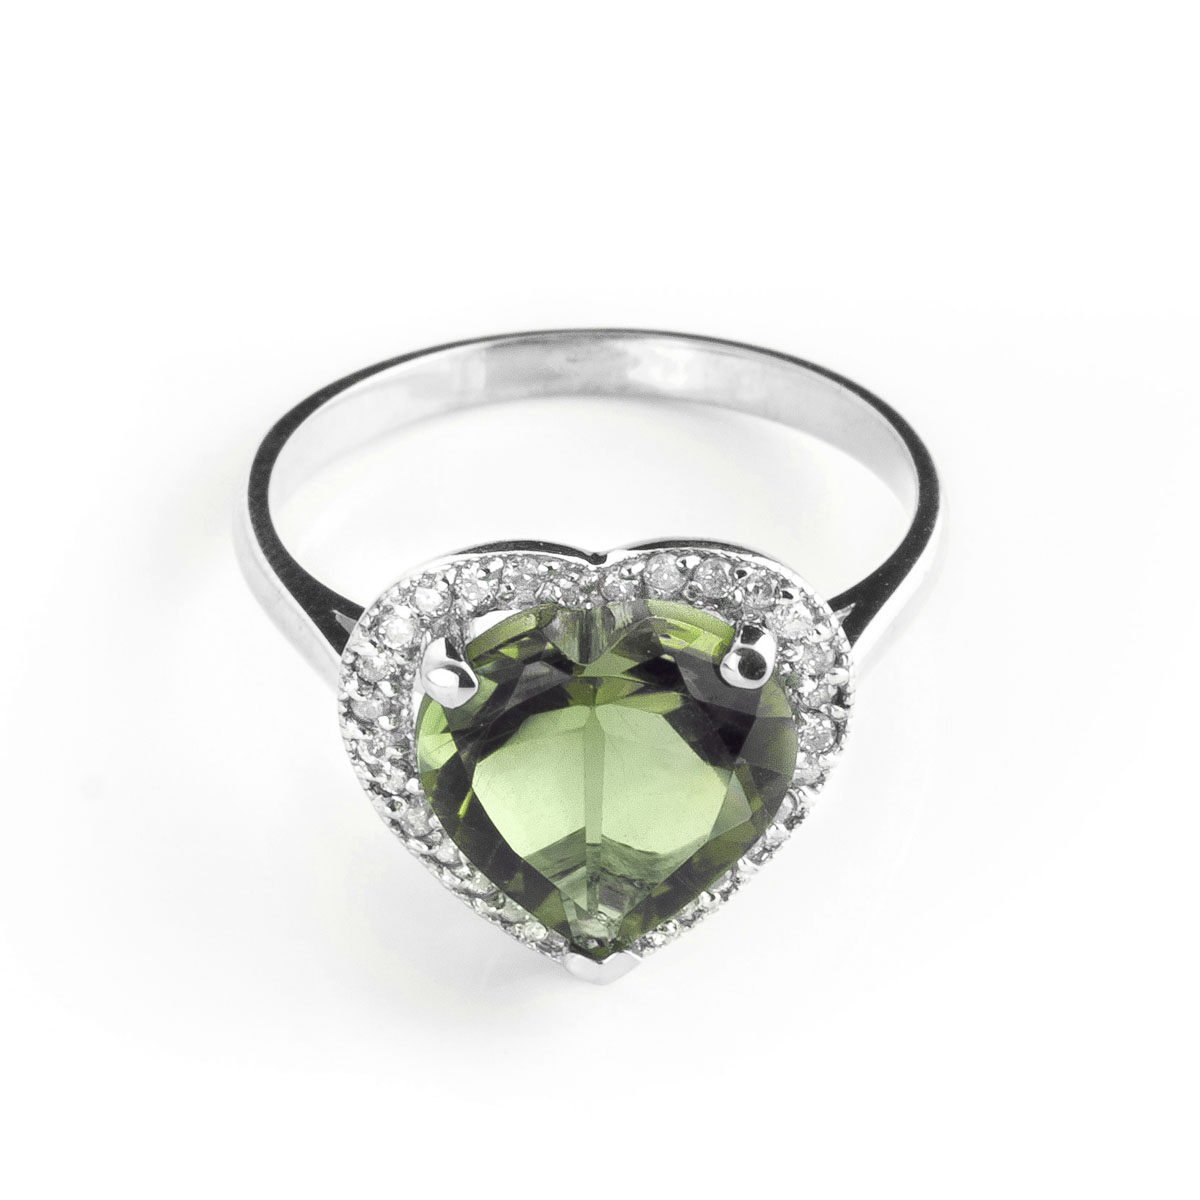 Green Amethyst Halo Ring 3.24 ctw in 9ct White Gold